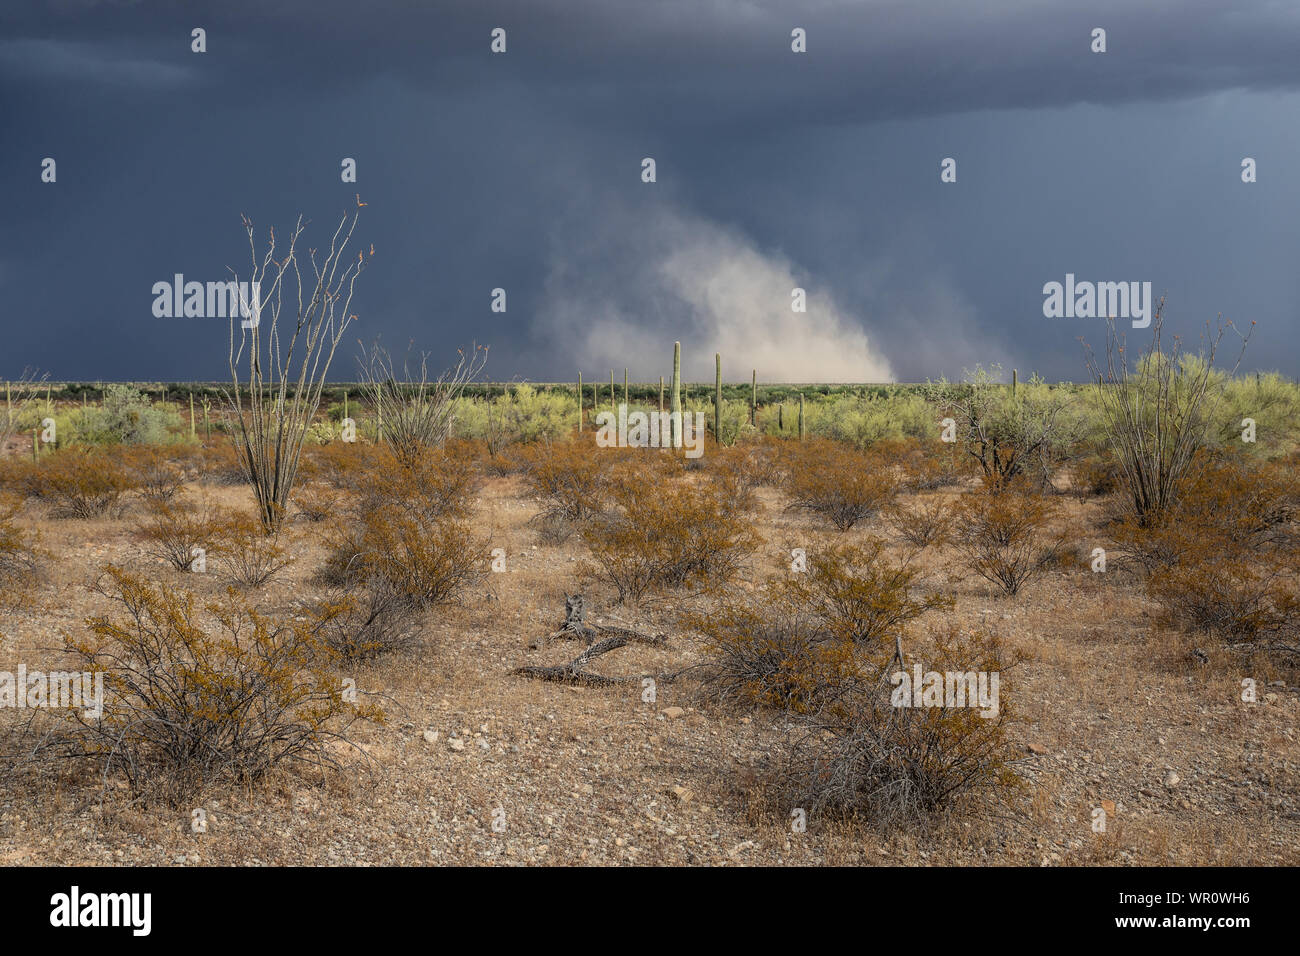 Thunderstorm outflow winds kick up a plume of dust over the Sonoyta Valley in Organ Pipe Cactus National Monument, Pima County, Arizona, USA Stock Photo